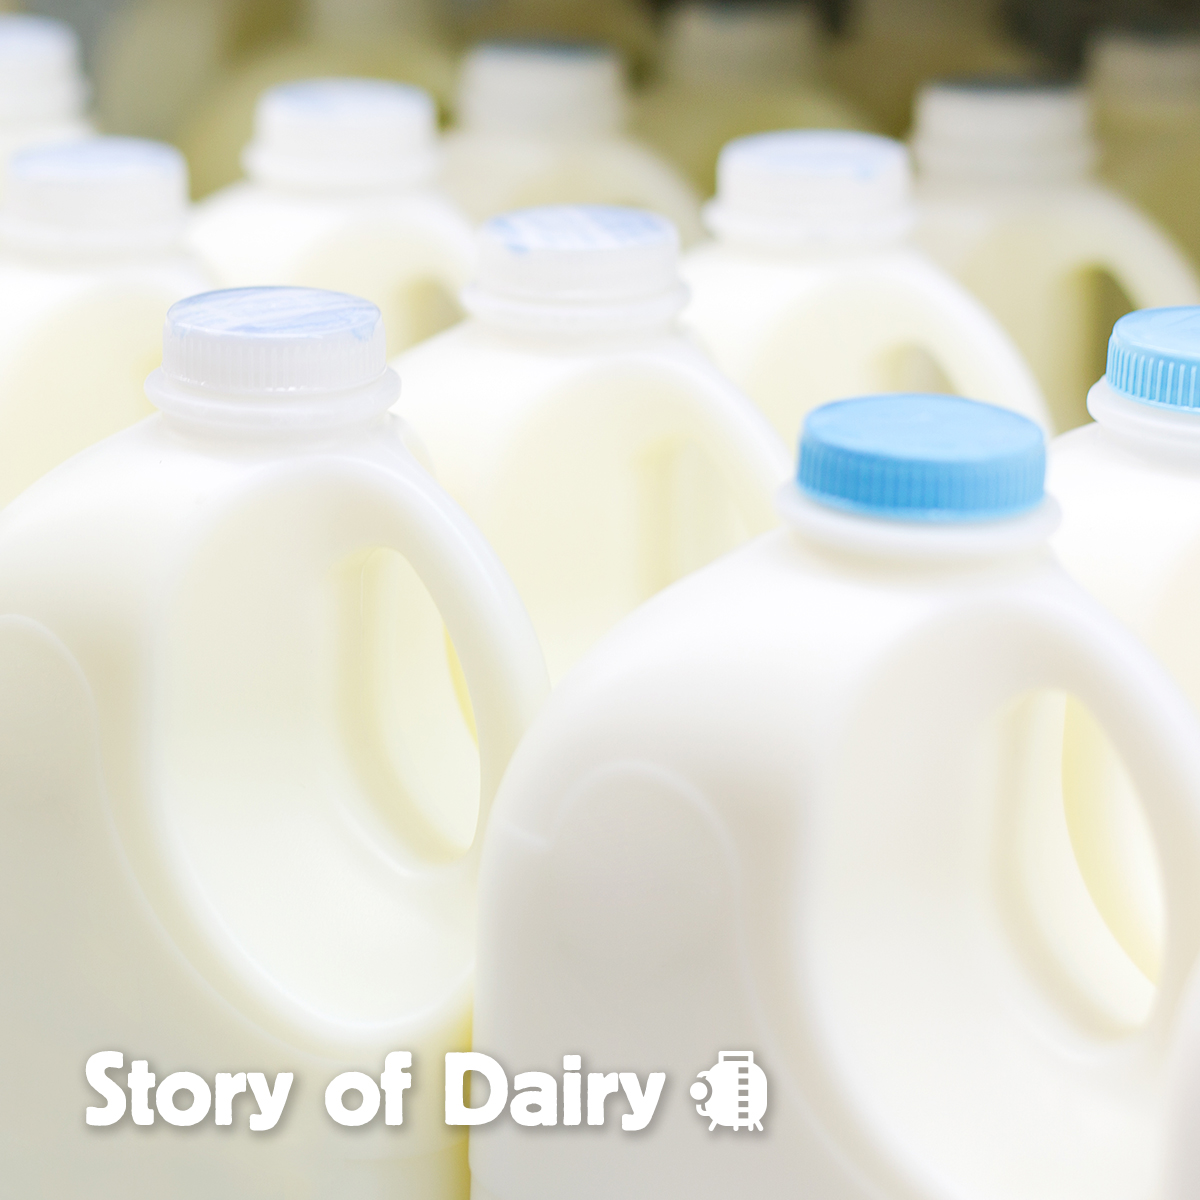 The Story of Dairy: What Happens When We Process Milk